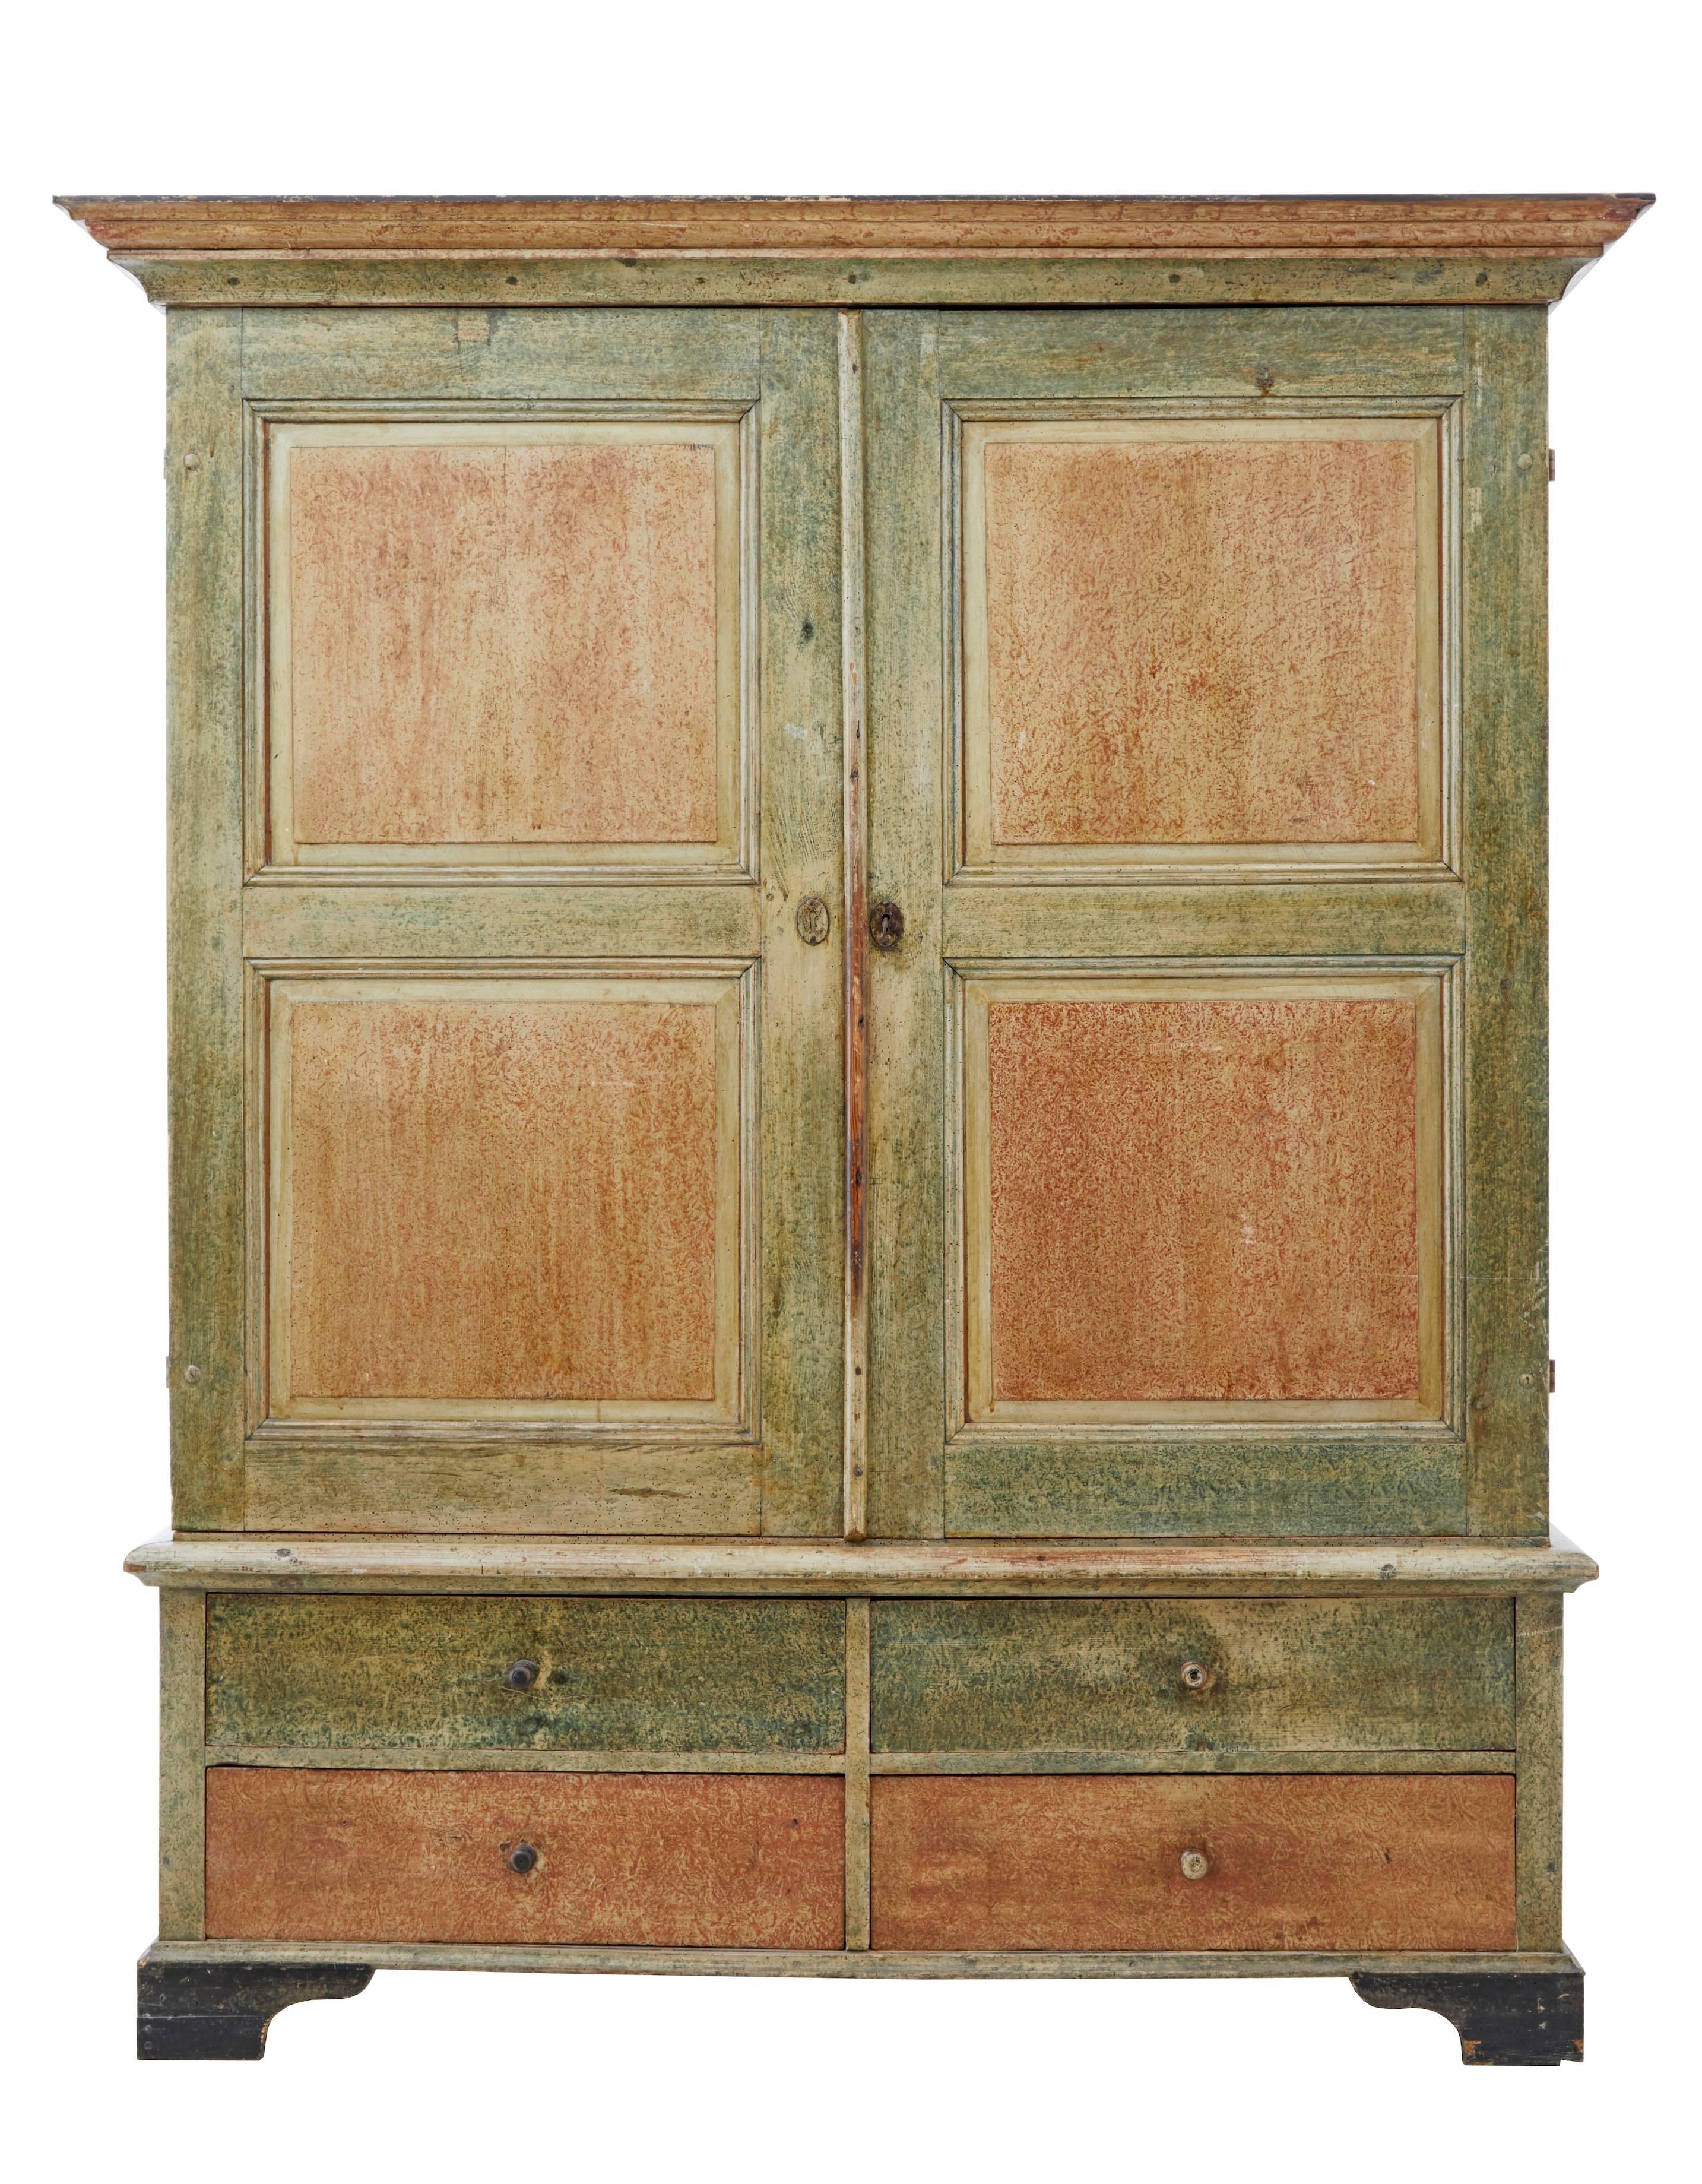 Mid-19th century Swedish pine cupboard on chest.
Original painted in rustic muted orange and greens.
Comprising of two parts.
Dated on the inside door 1860 with initials.
Top section with central partition, which has a wardrobe space with peg